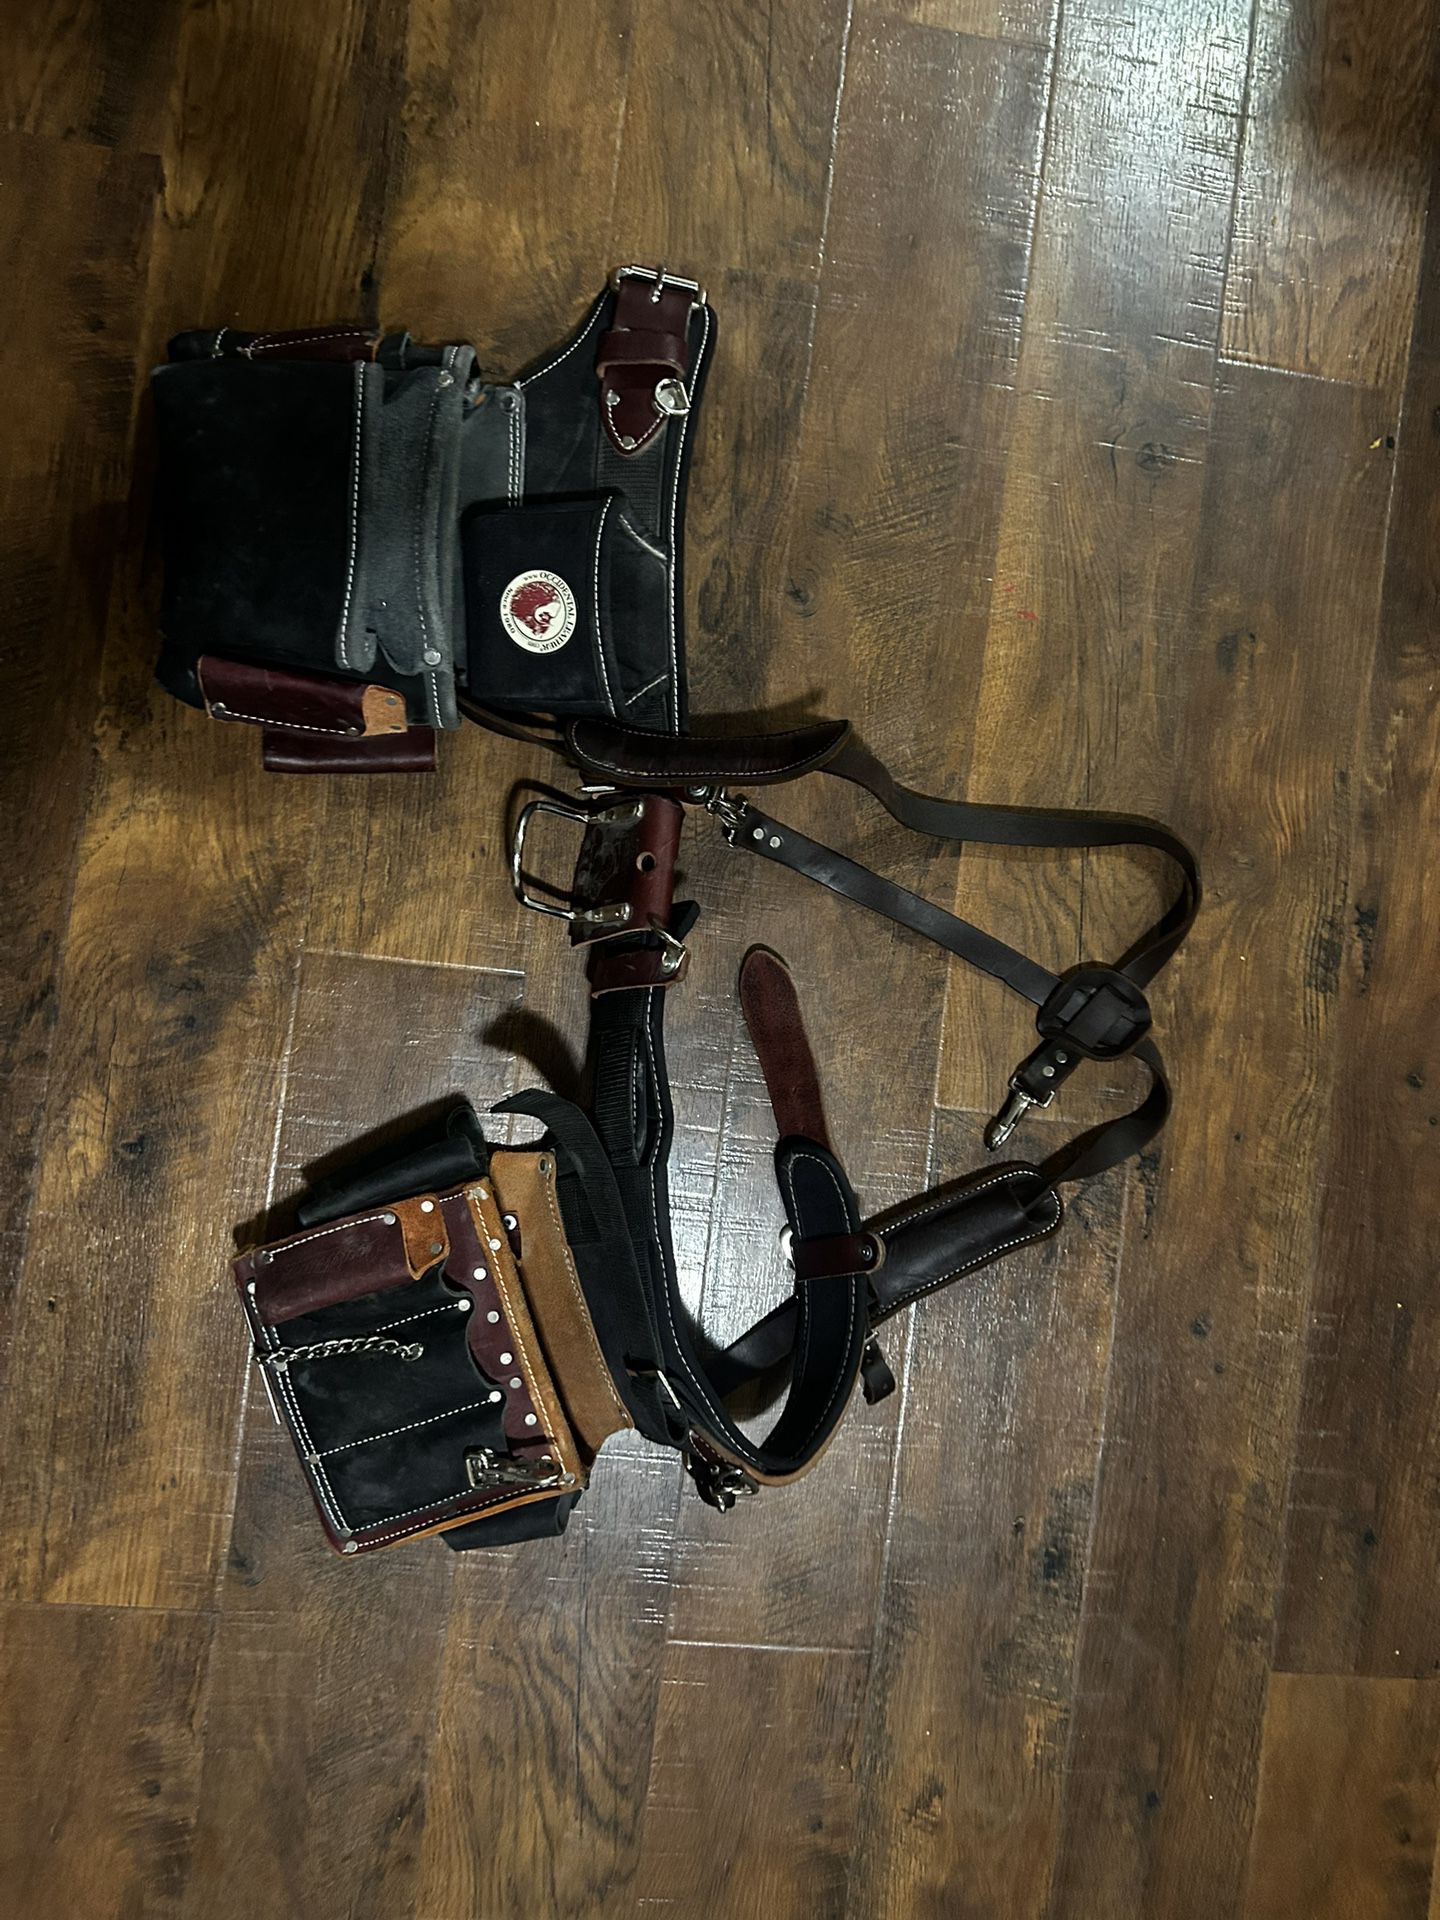 Electrical Tool Belt With Straps